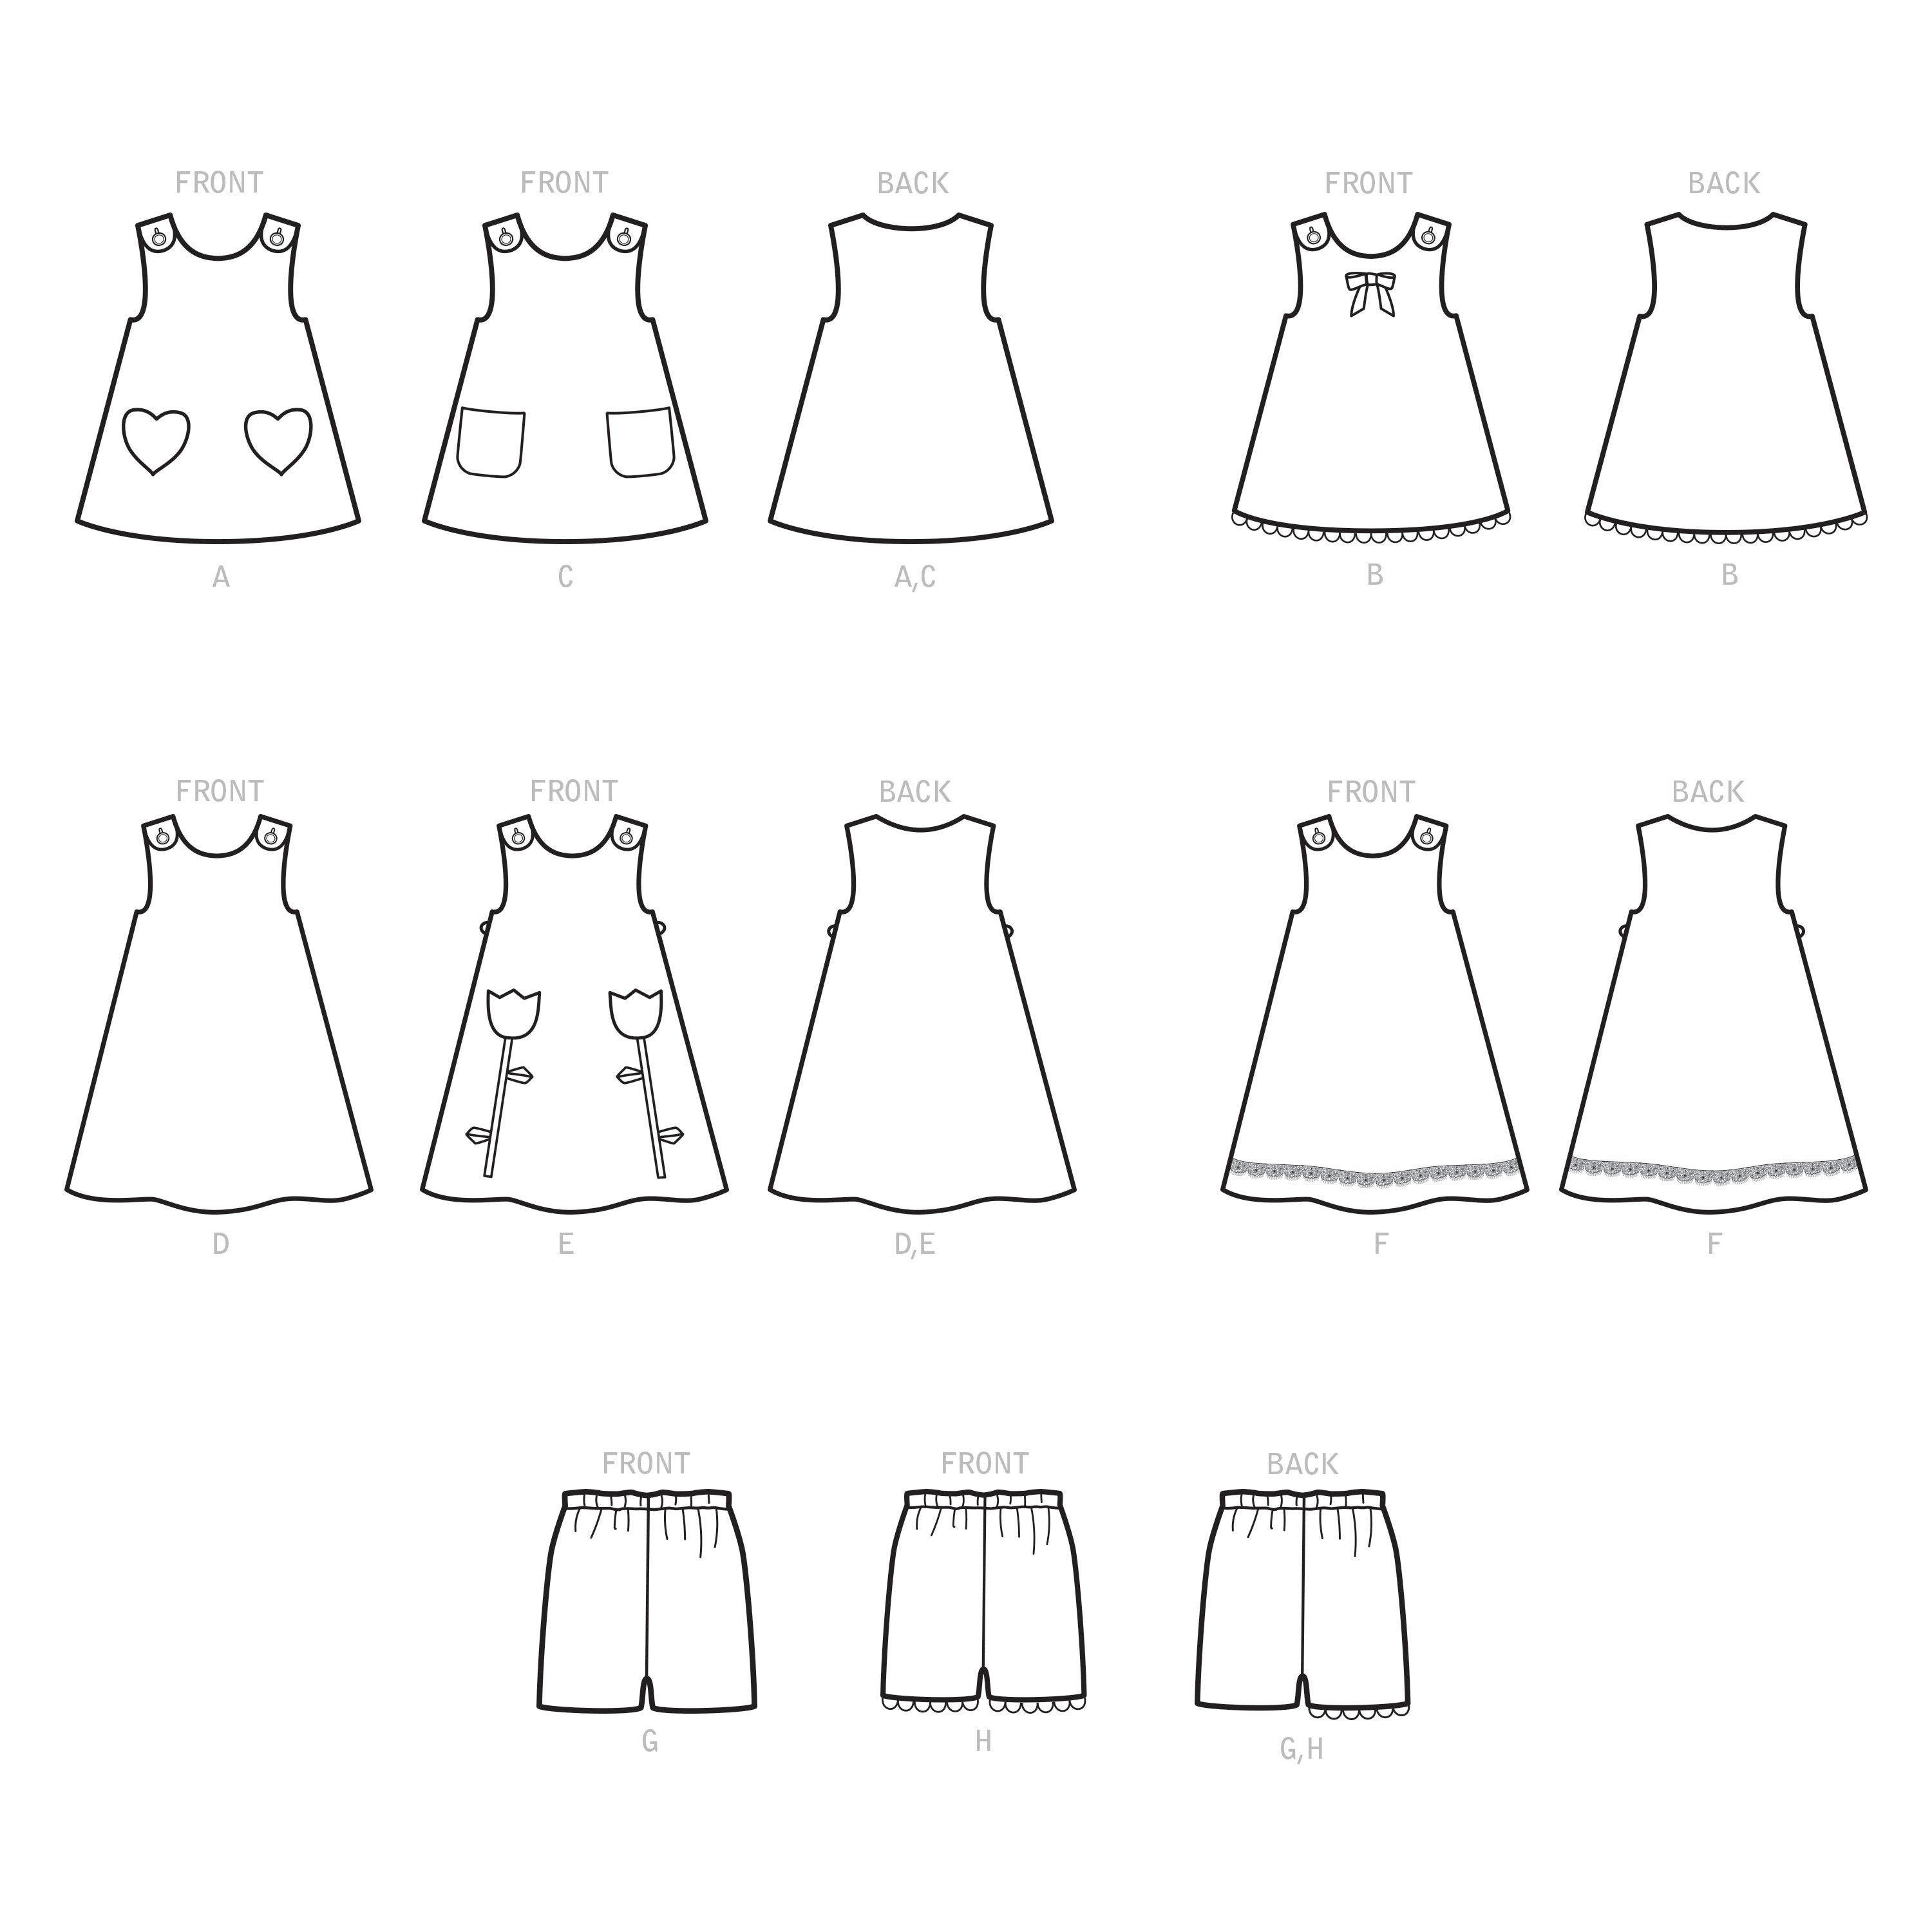 Simplicity Sewing Pattern S9318 Toddlers' Tent Tops, Dresses, and Shorts from Jaycotts Sewing Supplies